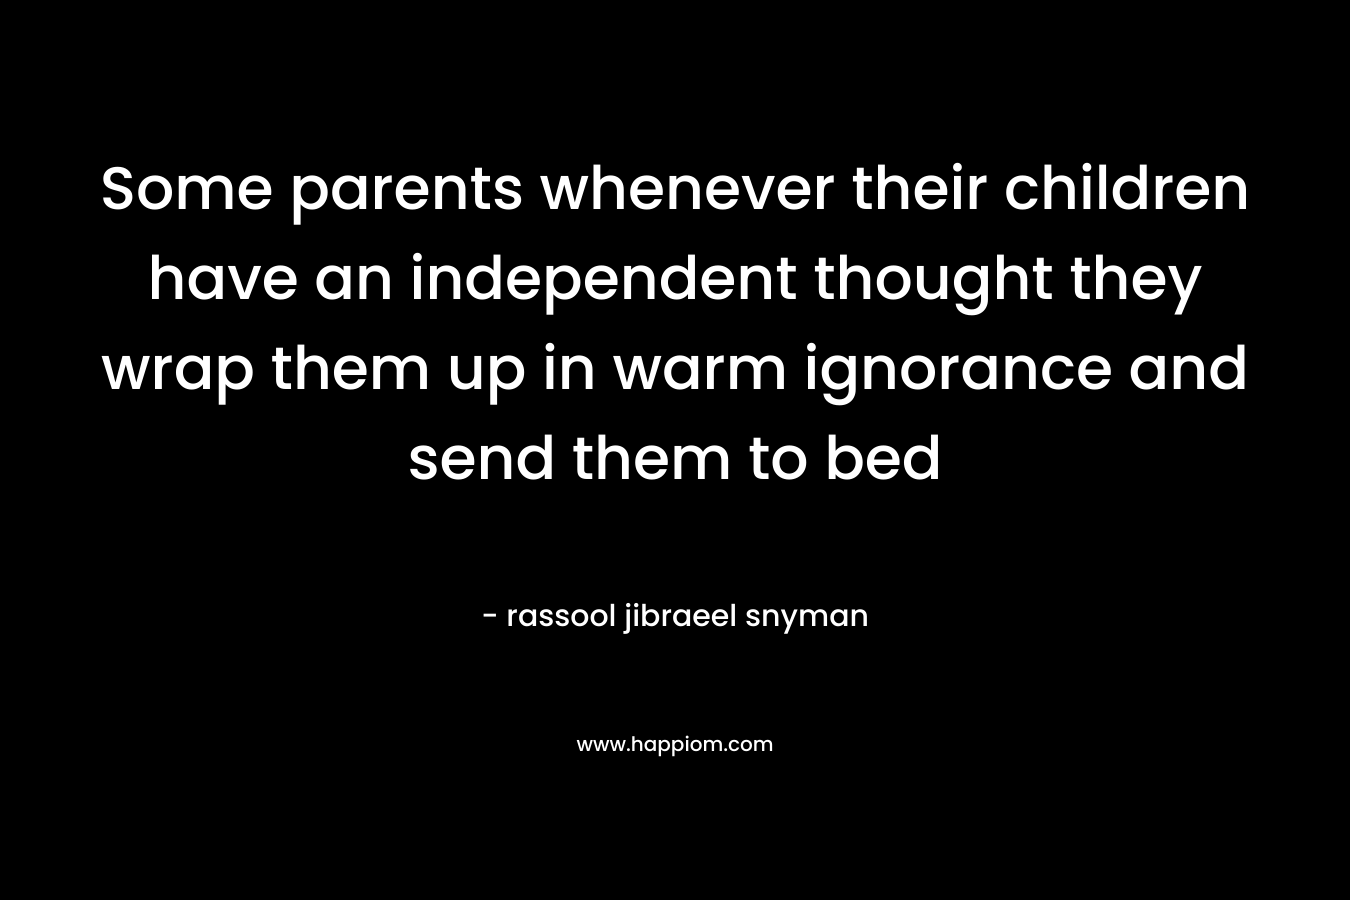 Some parents whenever their children have an independent thought they wrap them up in warm ignorance and send them to bed – rassool jibraeel snyman